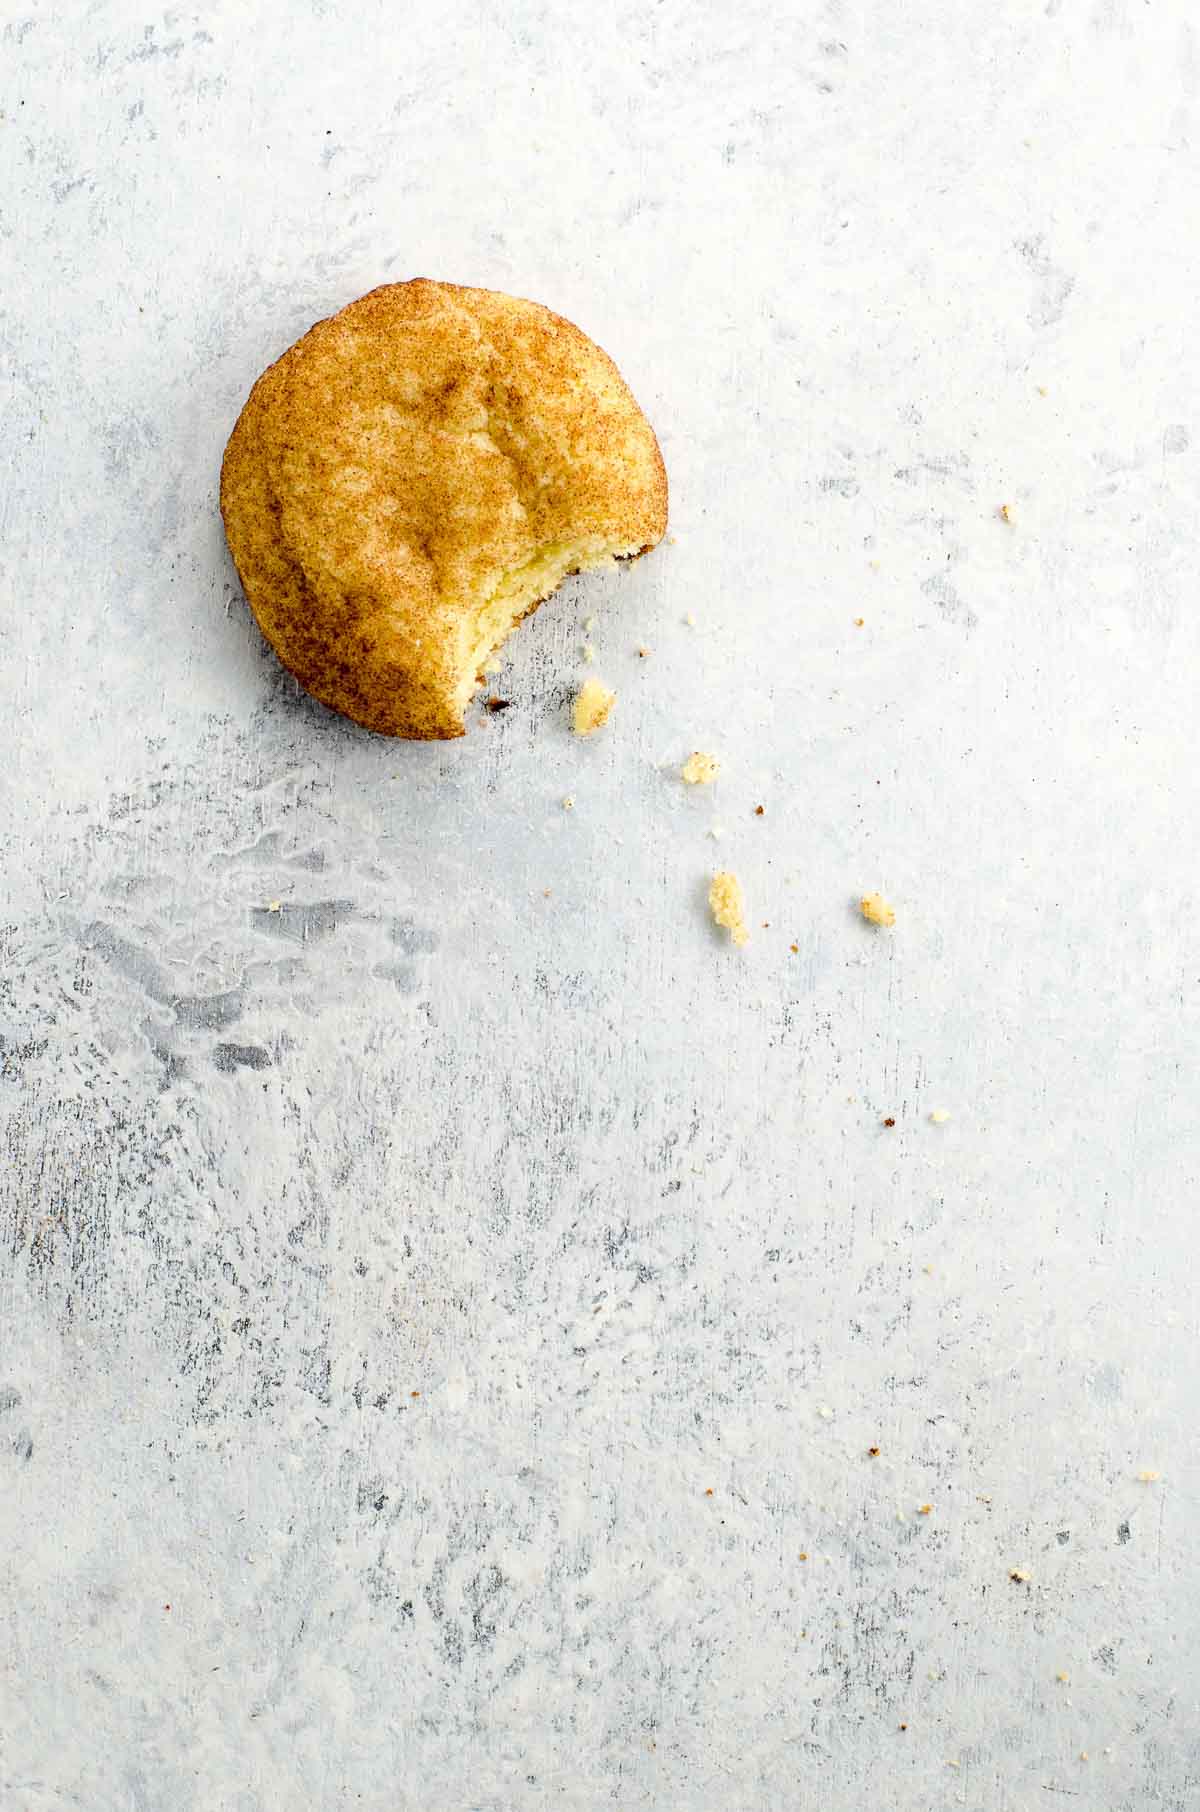 a chewy snickerdoodle on a light background with crumbs and a bite taken out of it